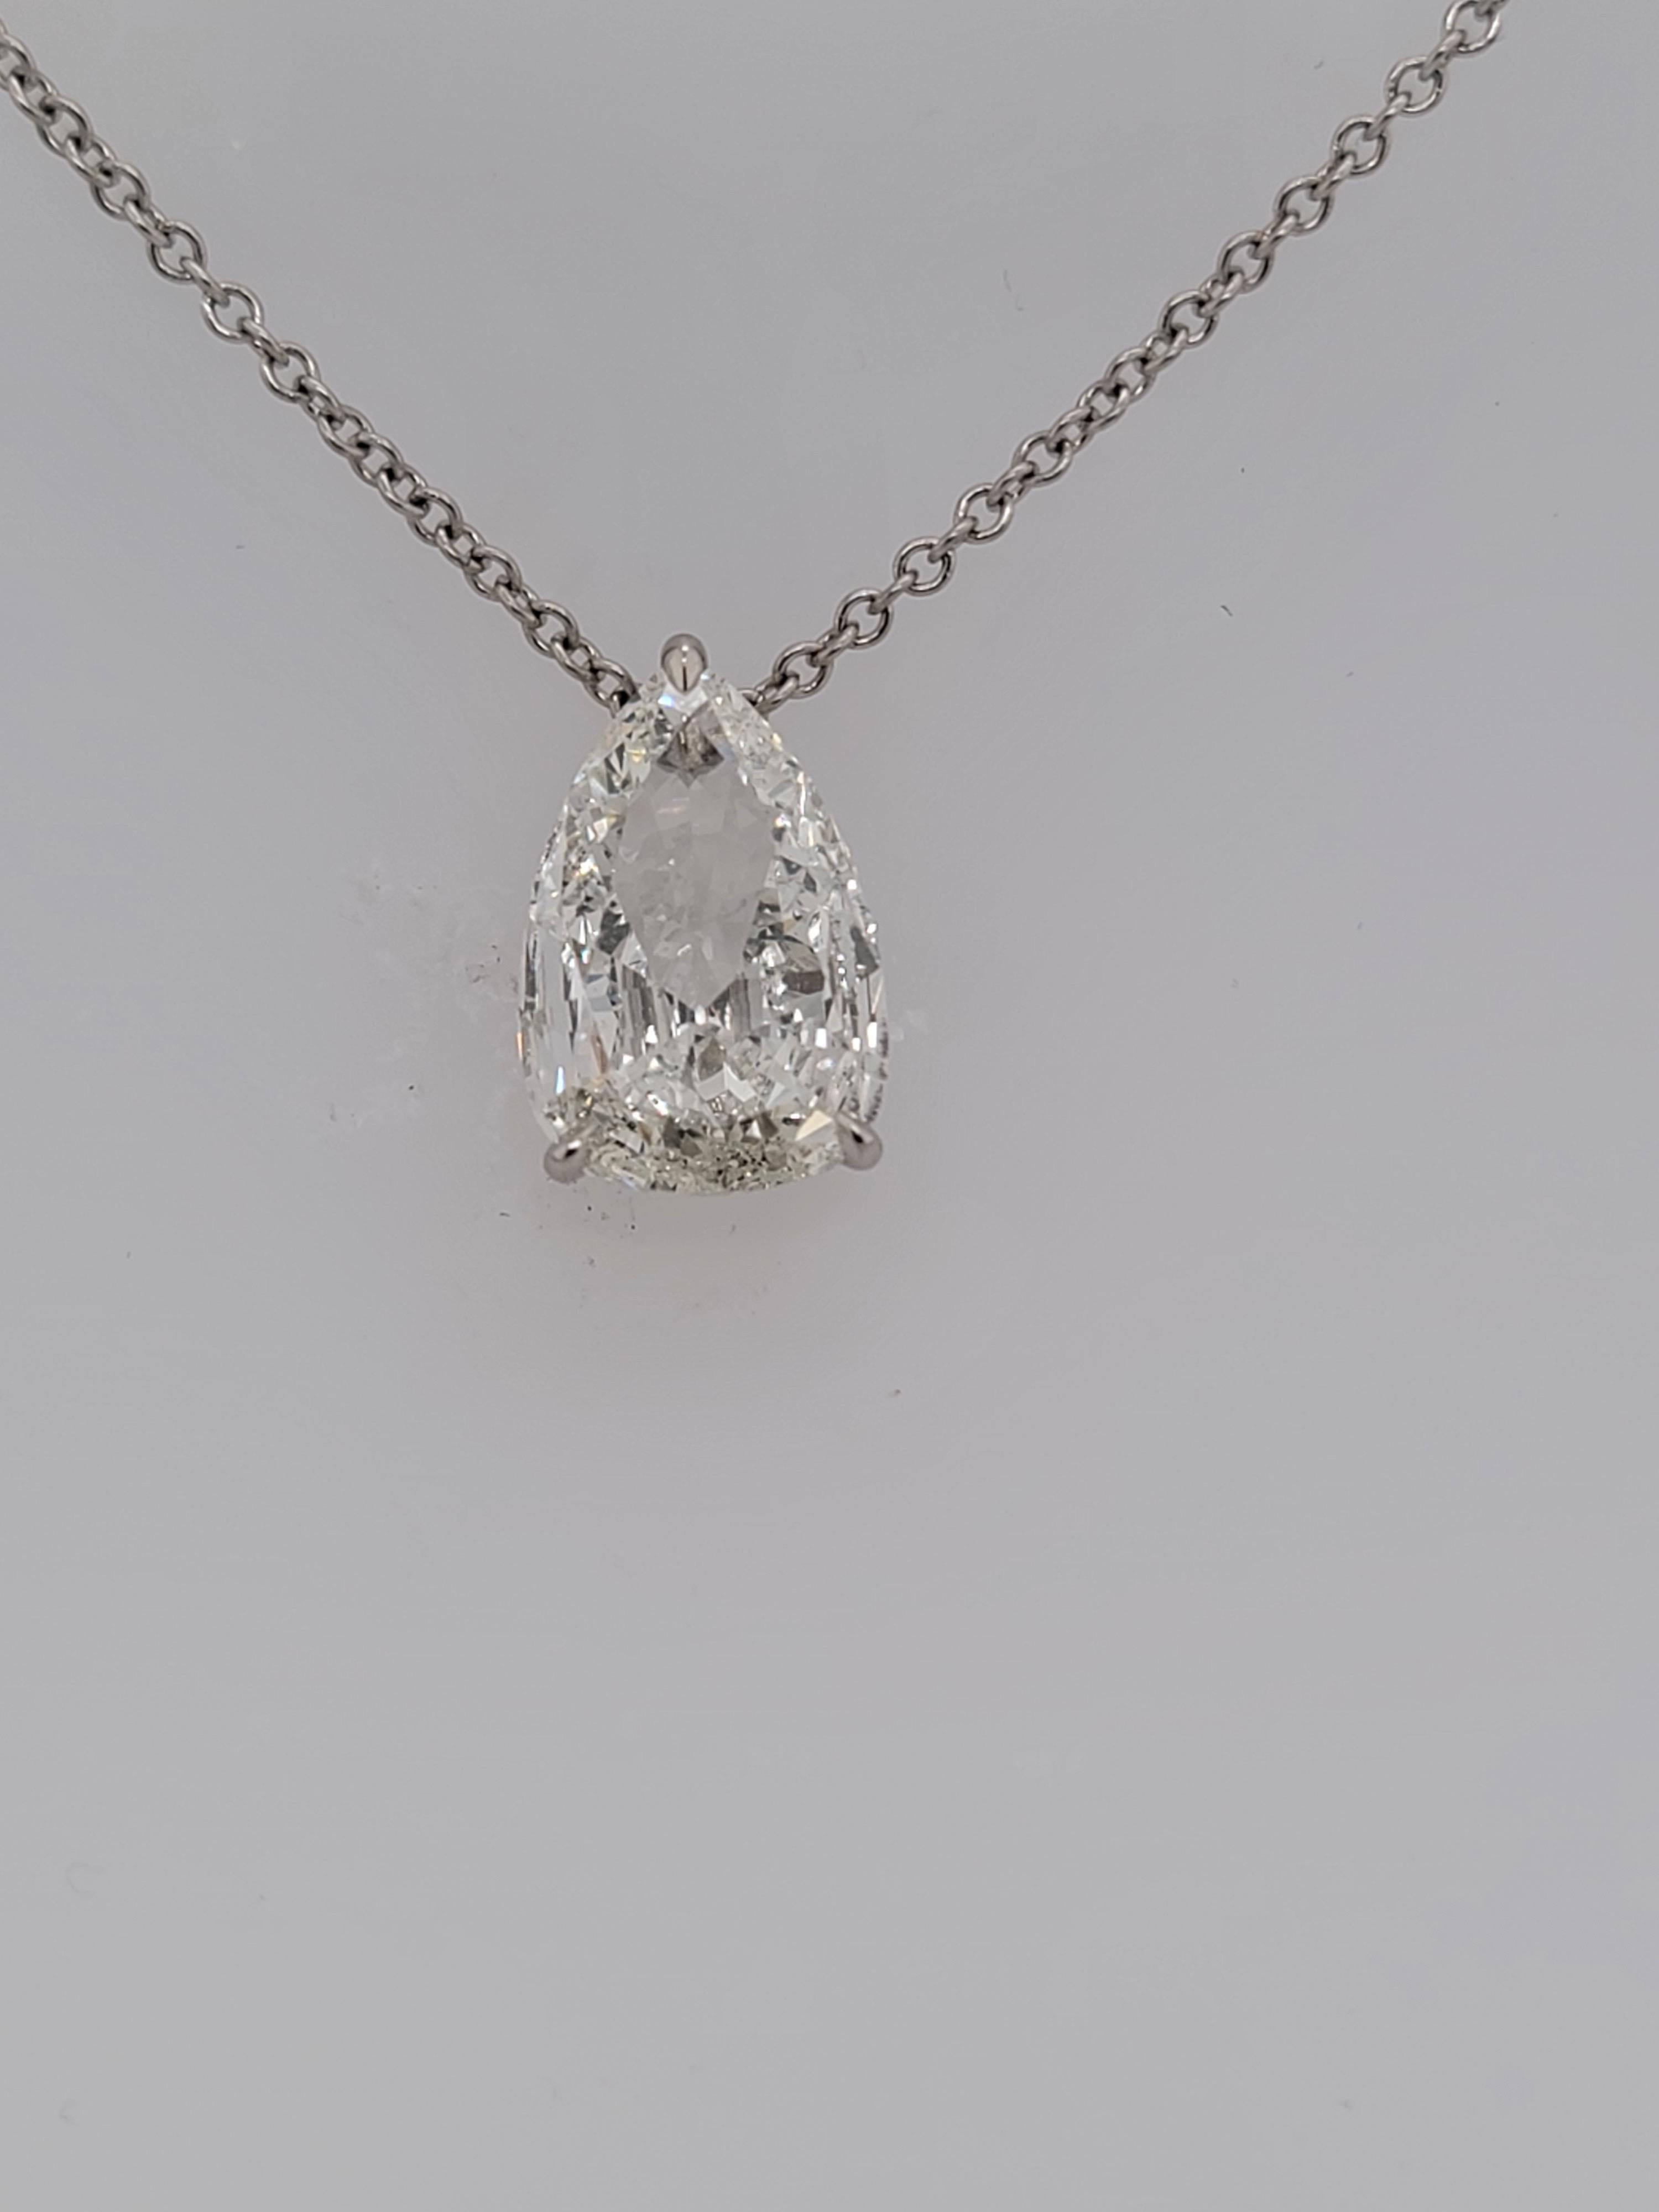 Fabulous diamond solitaire pendant from ISSAC NUSSBAUM NEW YORK.

Stunning pear brilliant diamond, GIA certified. This diamond is an example of the finest in diamond cutting. While the weight of this diamond is 3.82 Carats, due to the artistry of